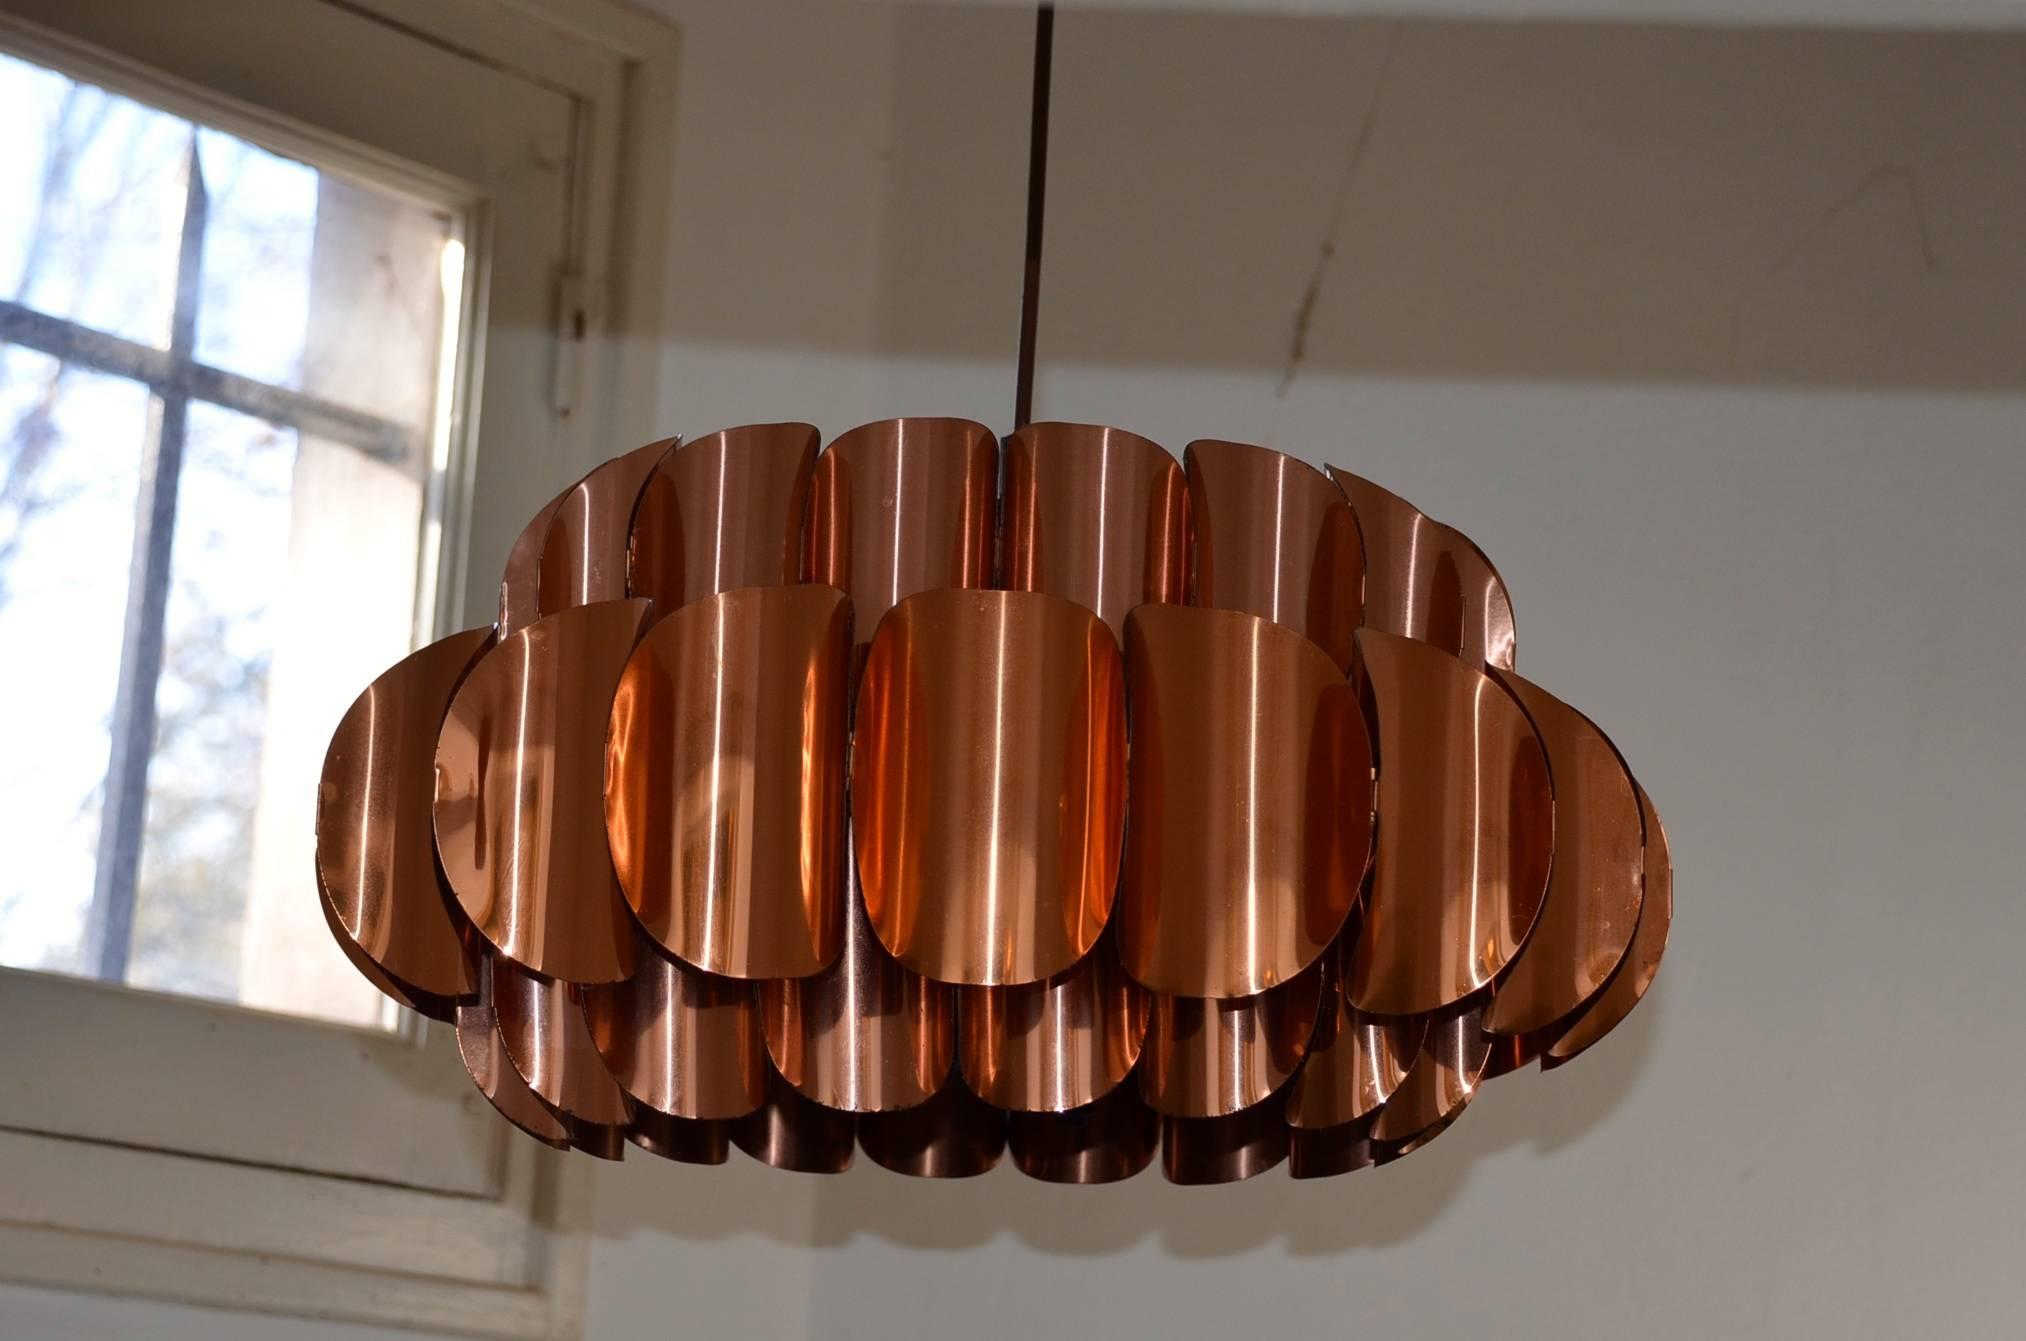 Circular ceiling pendant made of three tiers of round curved copper plates by Thorsten Orrling for Hans Agne Jakobsson AB Markaryd. This beautiful pendant gives a soft non-dazzle light sideways and a direct light downwards.